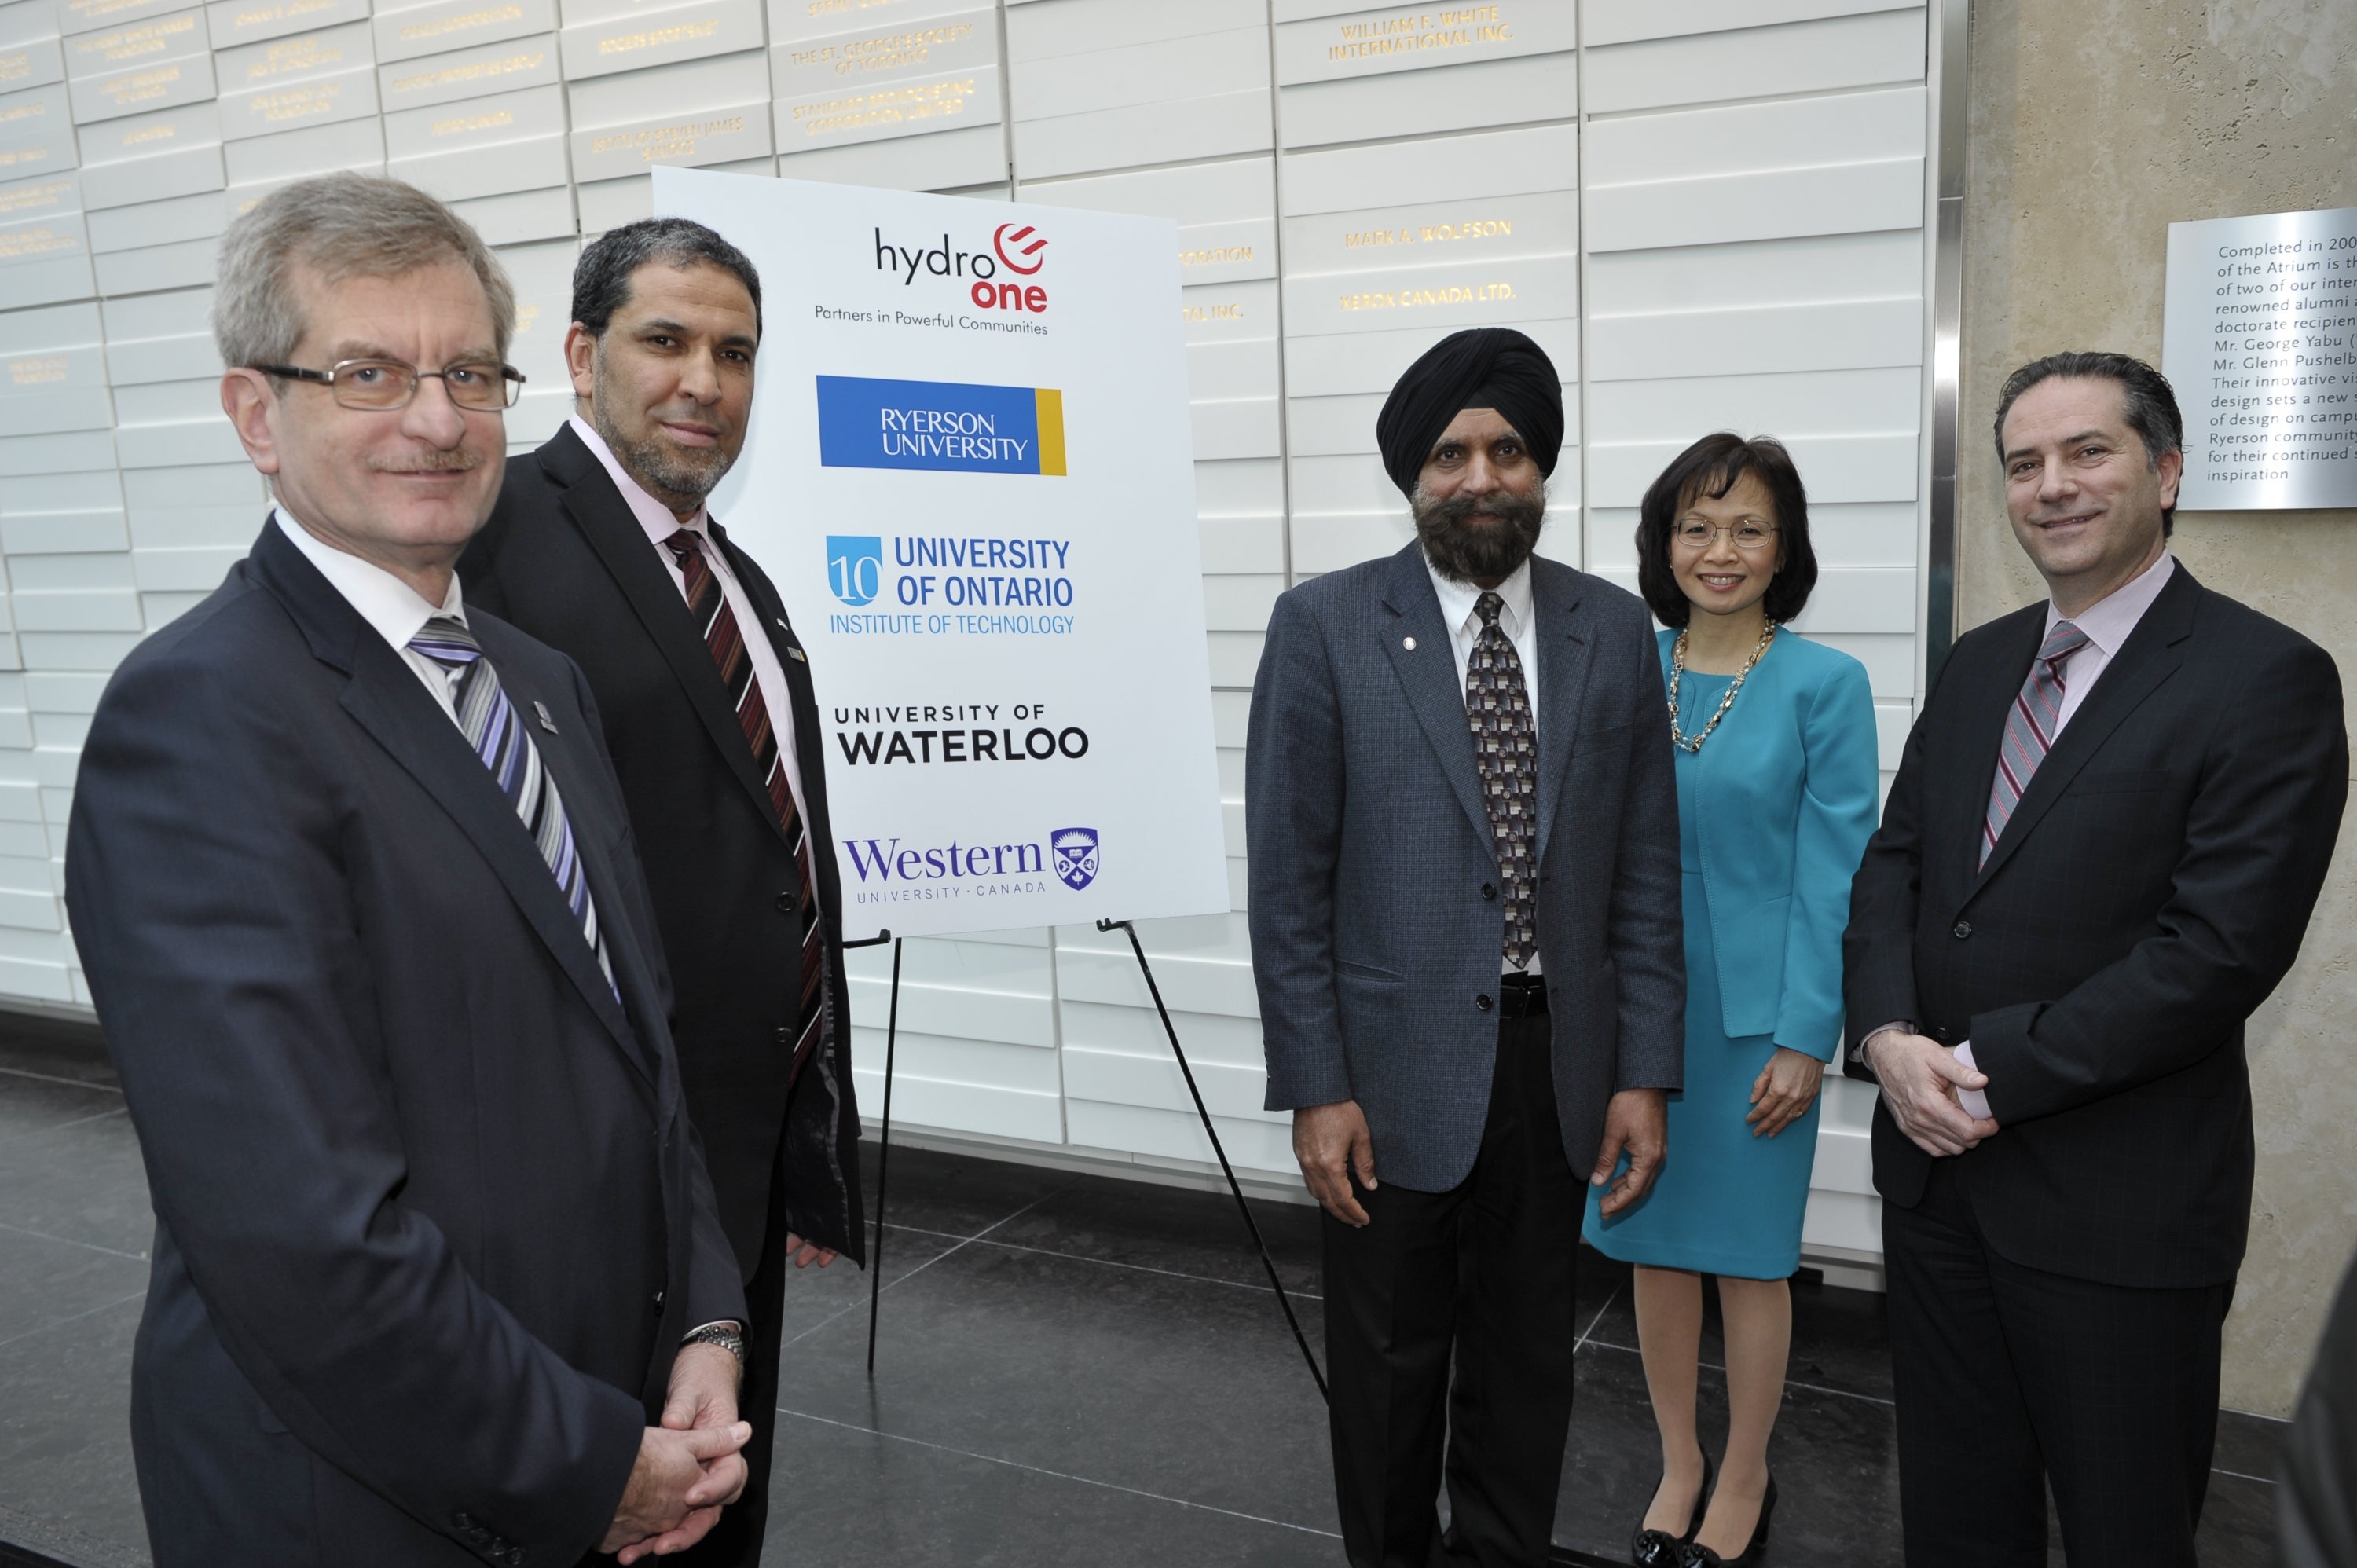 Pictured L-R: Andrew Hrymak, Dean of Engineering, Western University; Dr. Mohamed Lachemi, Dean of Engineering & Architectural Science, Ryerson University; Dr. Tarlochan Sidhu, Dean of Engineering, University of Ontario Institute of Technology; Pearl Sullivan, University Partnership Representative & Dean of Engineering, University of Waterloo; Carmine Marcello, President & CEO, Hydro One.